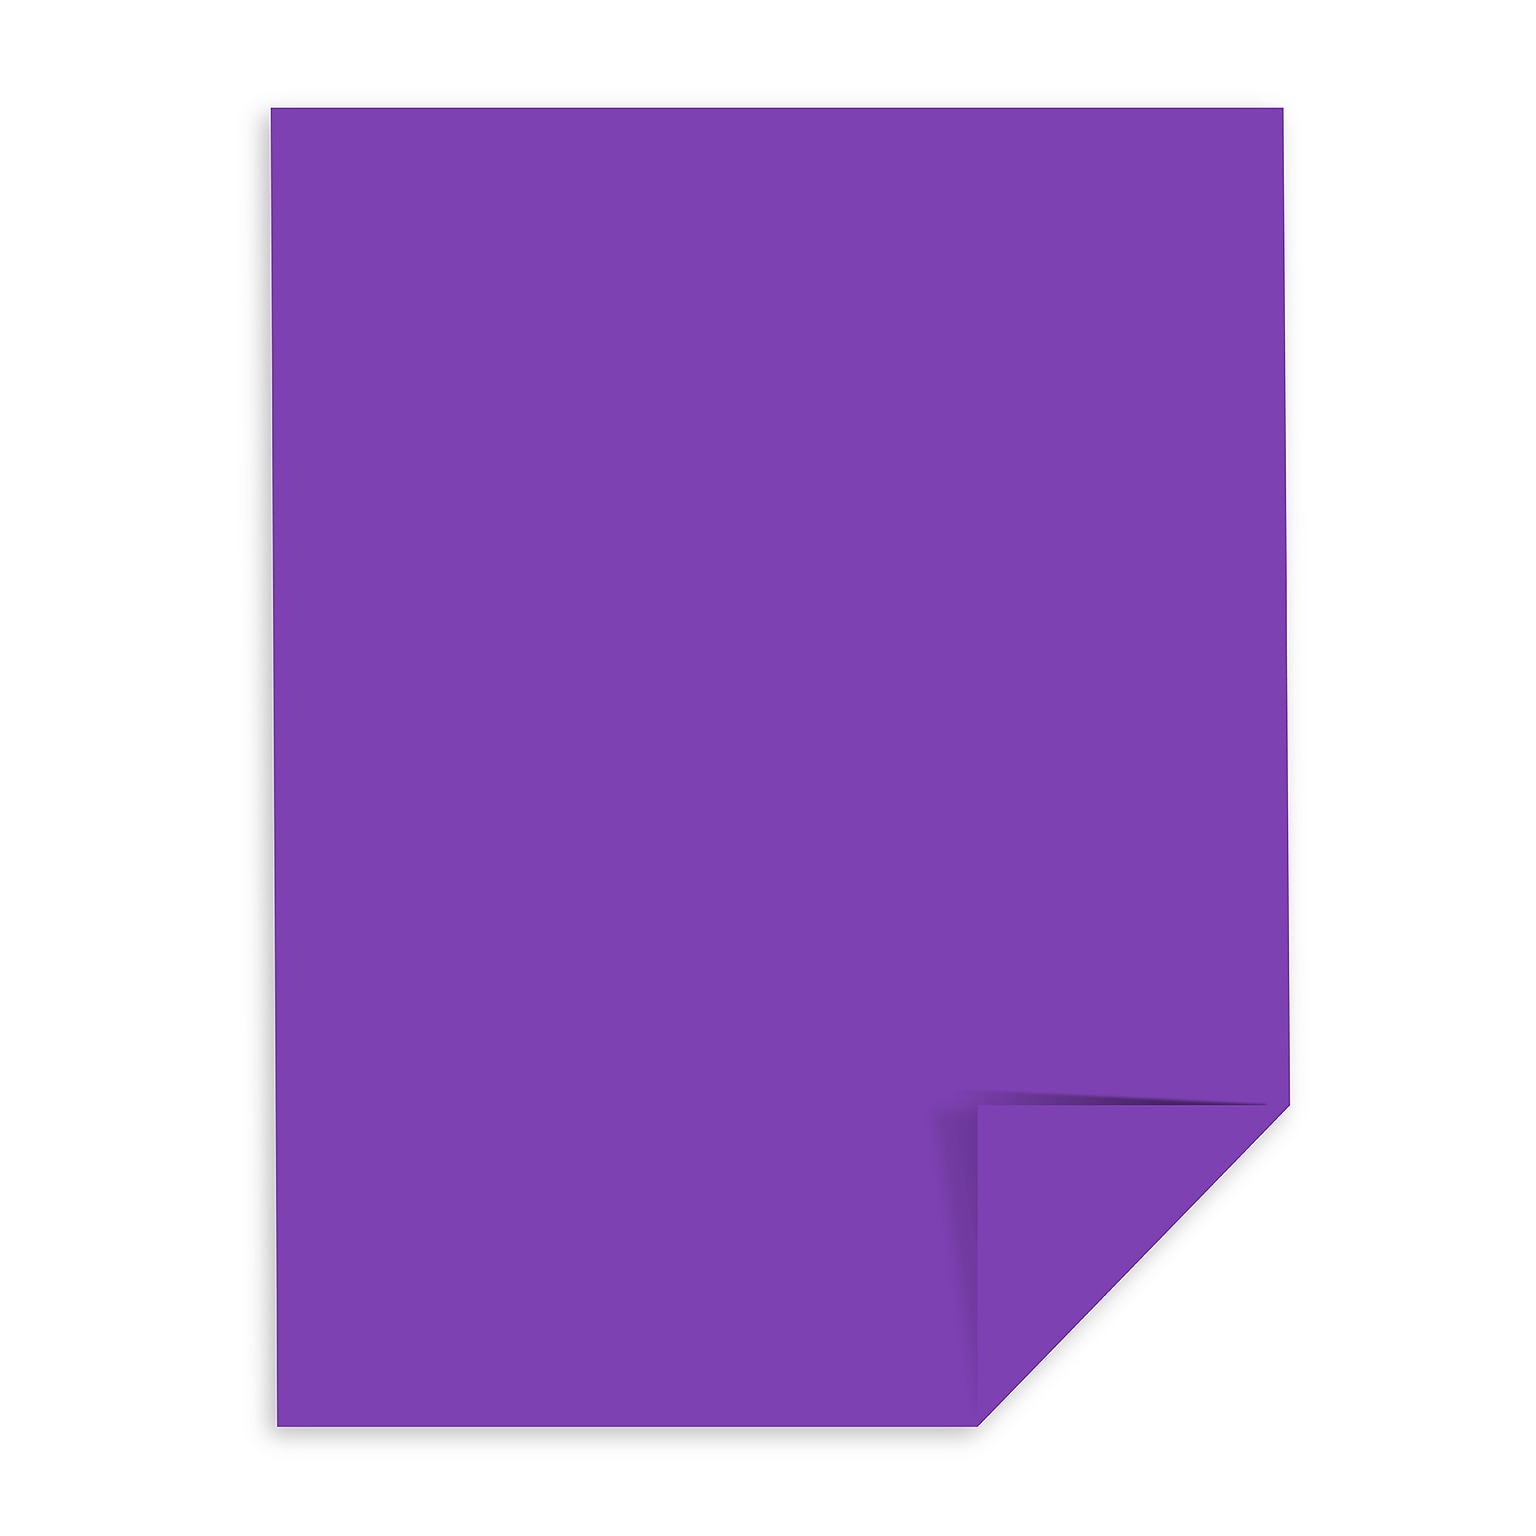 Astrobrights 65 lb. Cardstock Paper, 8.5 x 11, Purple, 250 Sheets/Pack (WAU21971)